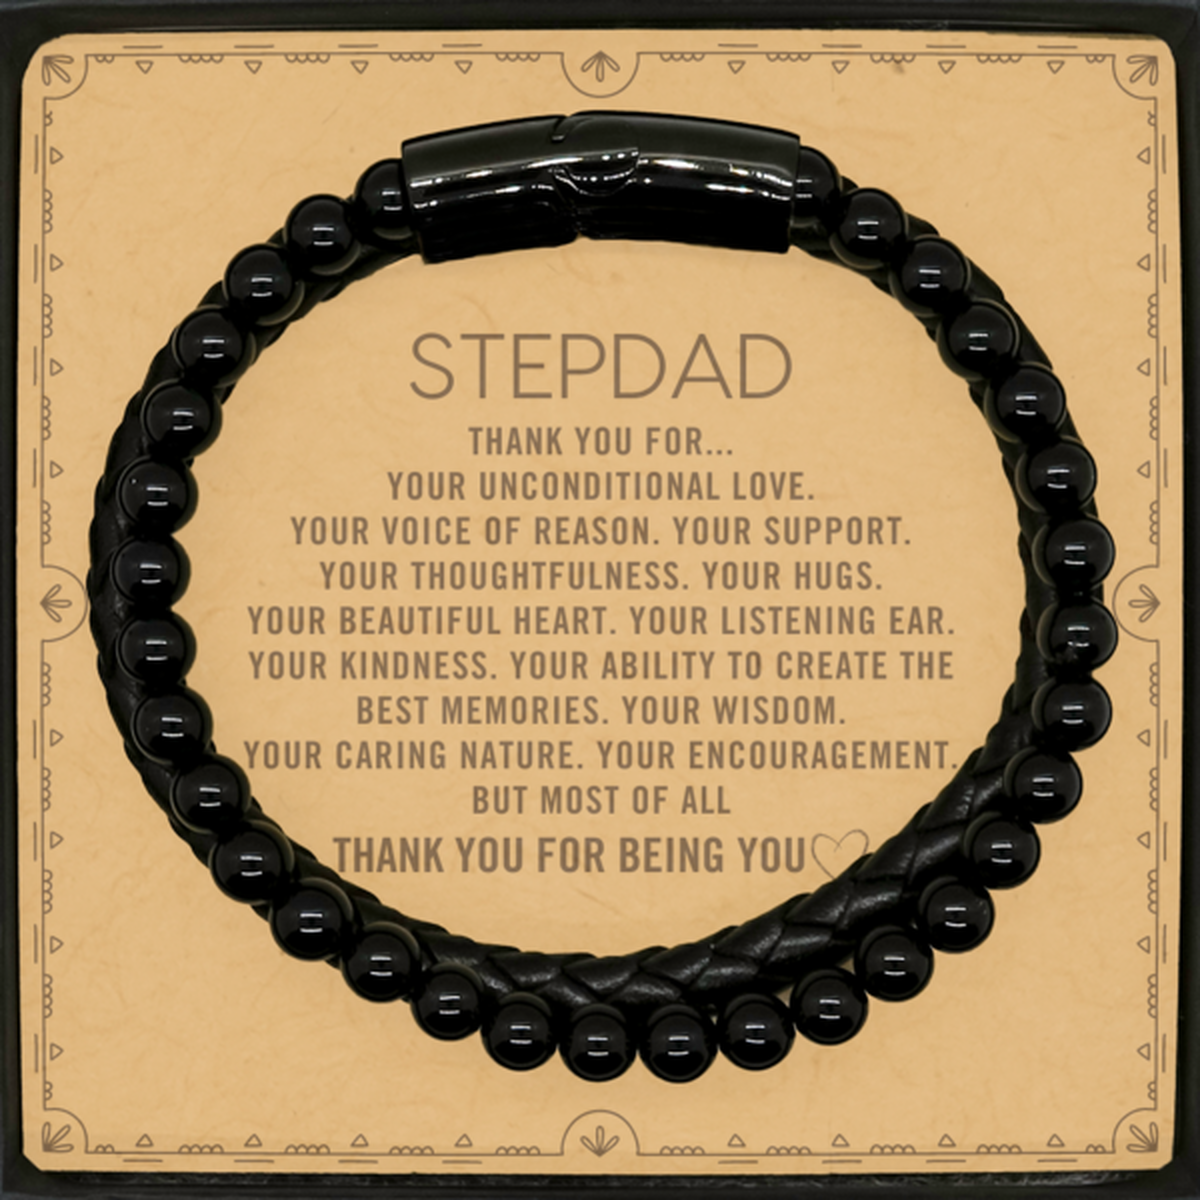 Stepdad Stone Leather Bracelets Custom, Message Card Gifts For Stepdad Christmas Graduation Birthday Gifts for Men Women Stepdad Thank you for Your unconditional love